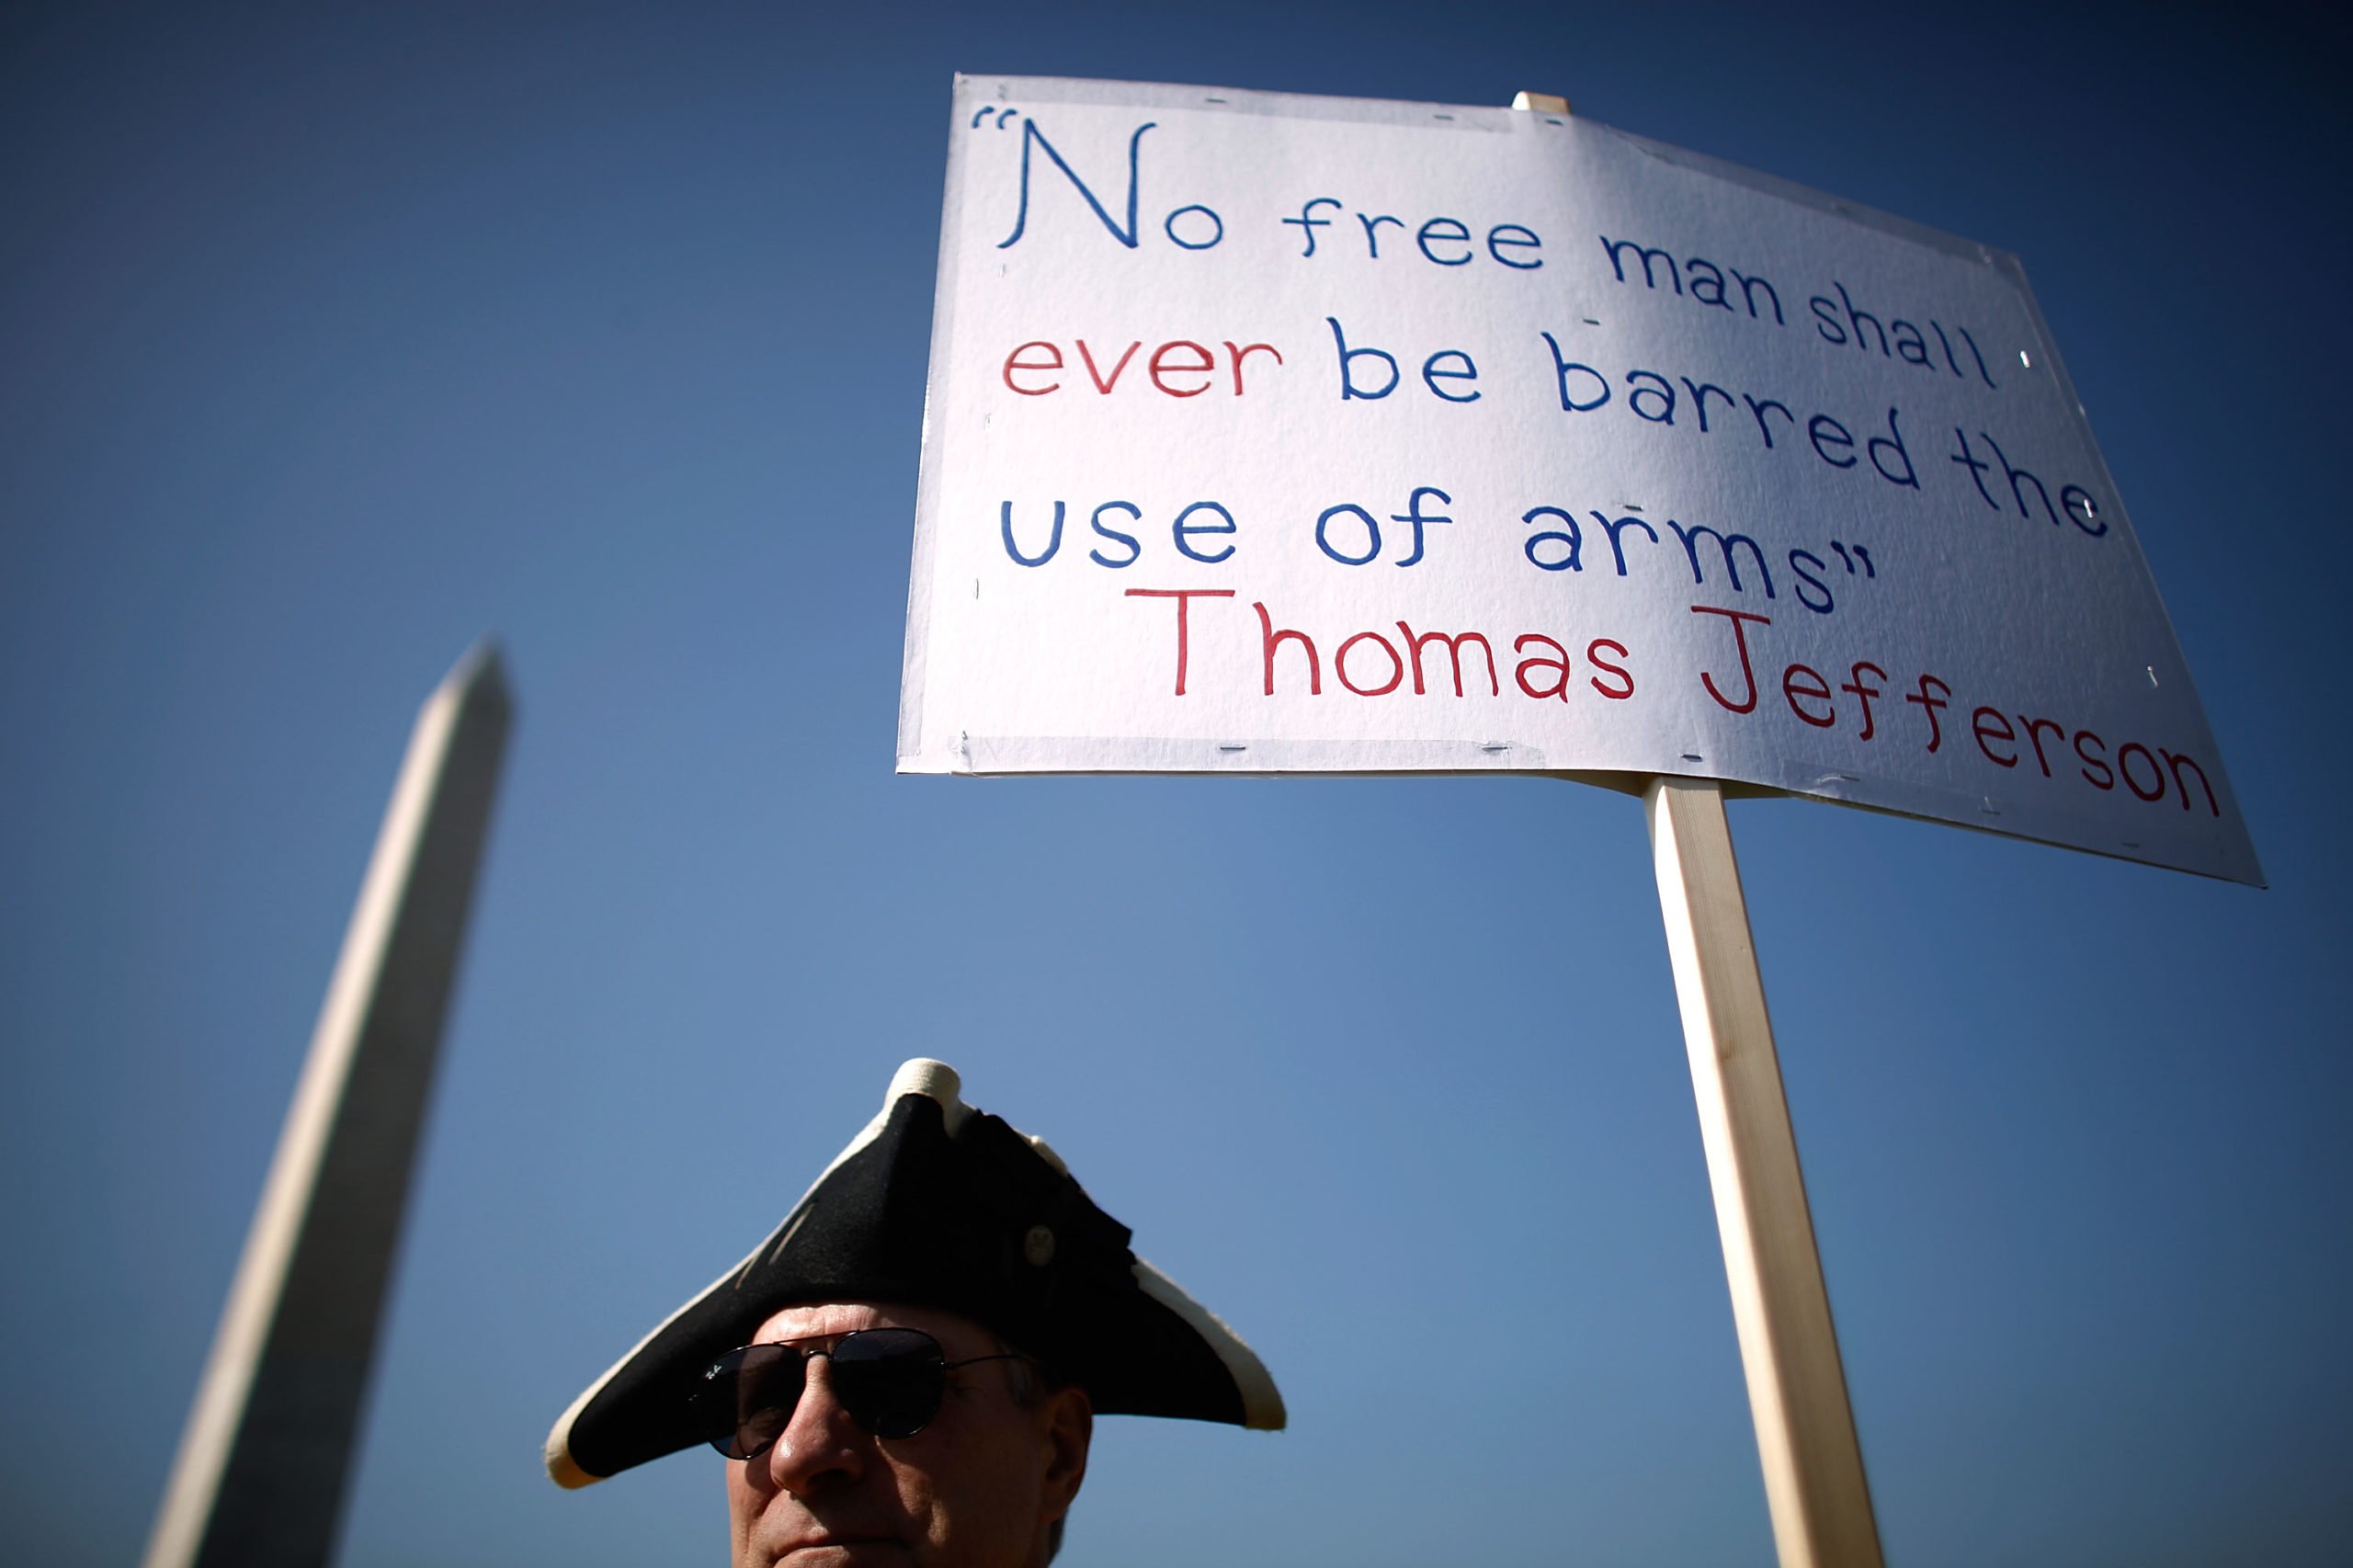 WASHINGTON - APRIL 19: A man stands next to a sign pro-gun rally organized by the Second Amendment March group, near the Washington Monument April 19, 2010 in Washington, DC. Known as Patriots' Day, April 19 is also the anniversary of the American Revolutionary War battles of Lexington and Concord, the Oklahoma City bombing and the attack of the Branch Dividian compound. (Photo by Chip Somodevilla/Getty Images)